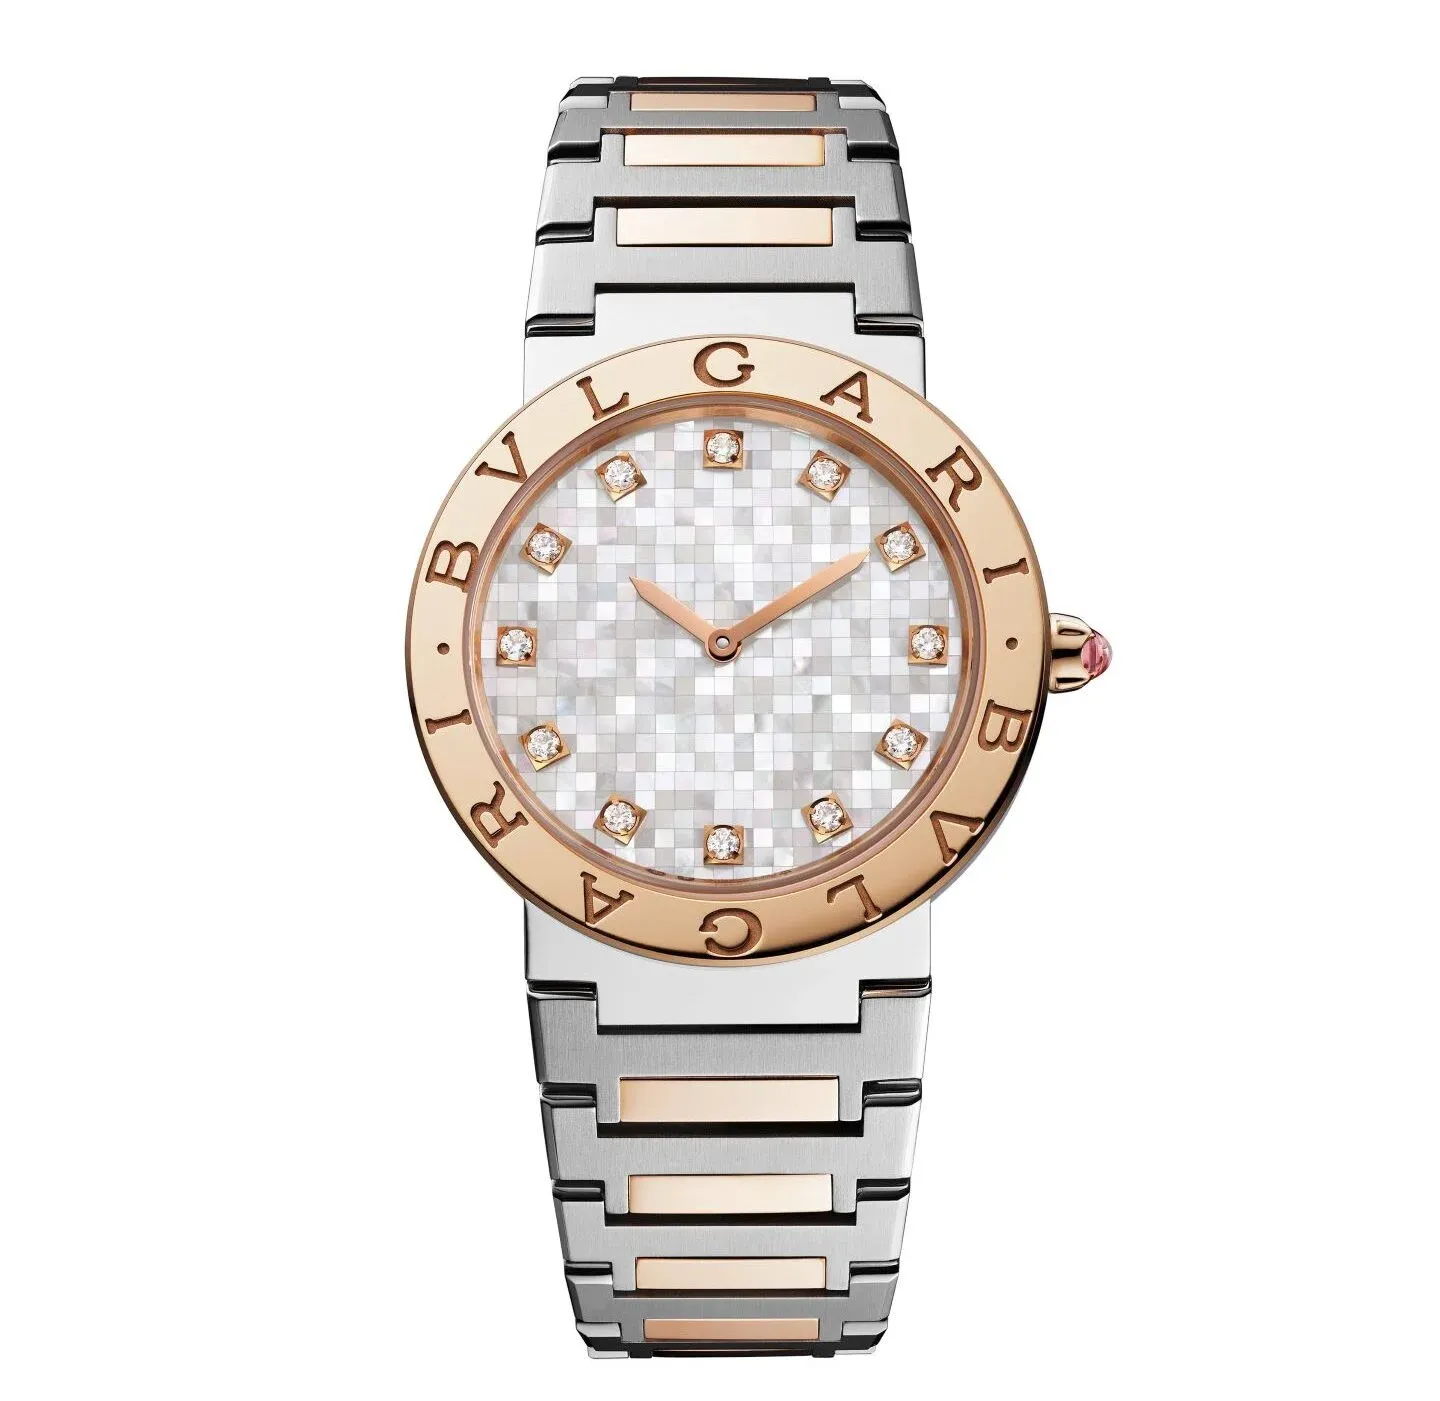 The watch features a mosaic dial made of mother-of-pearl